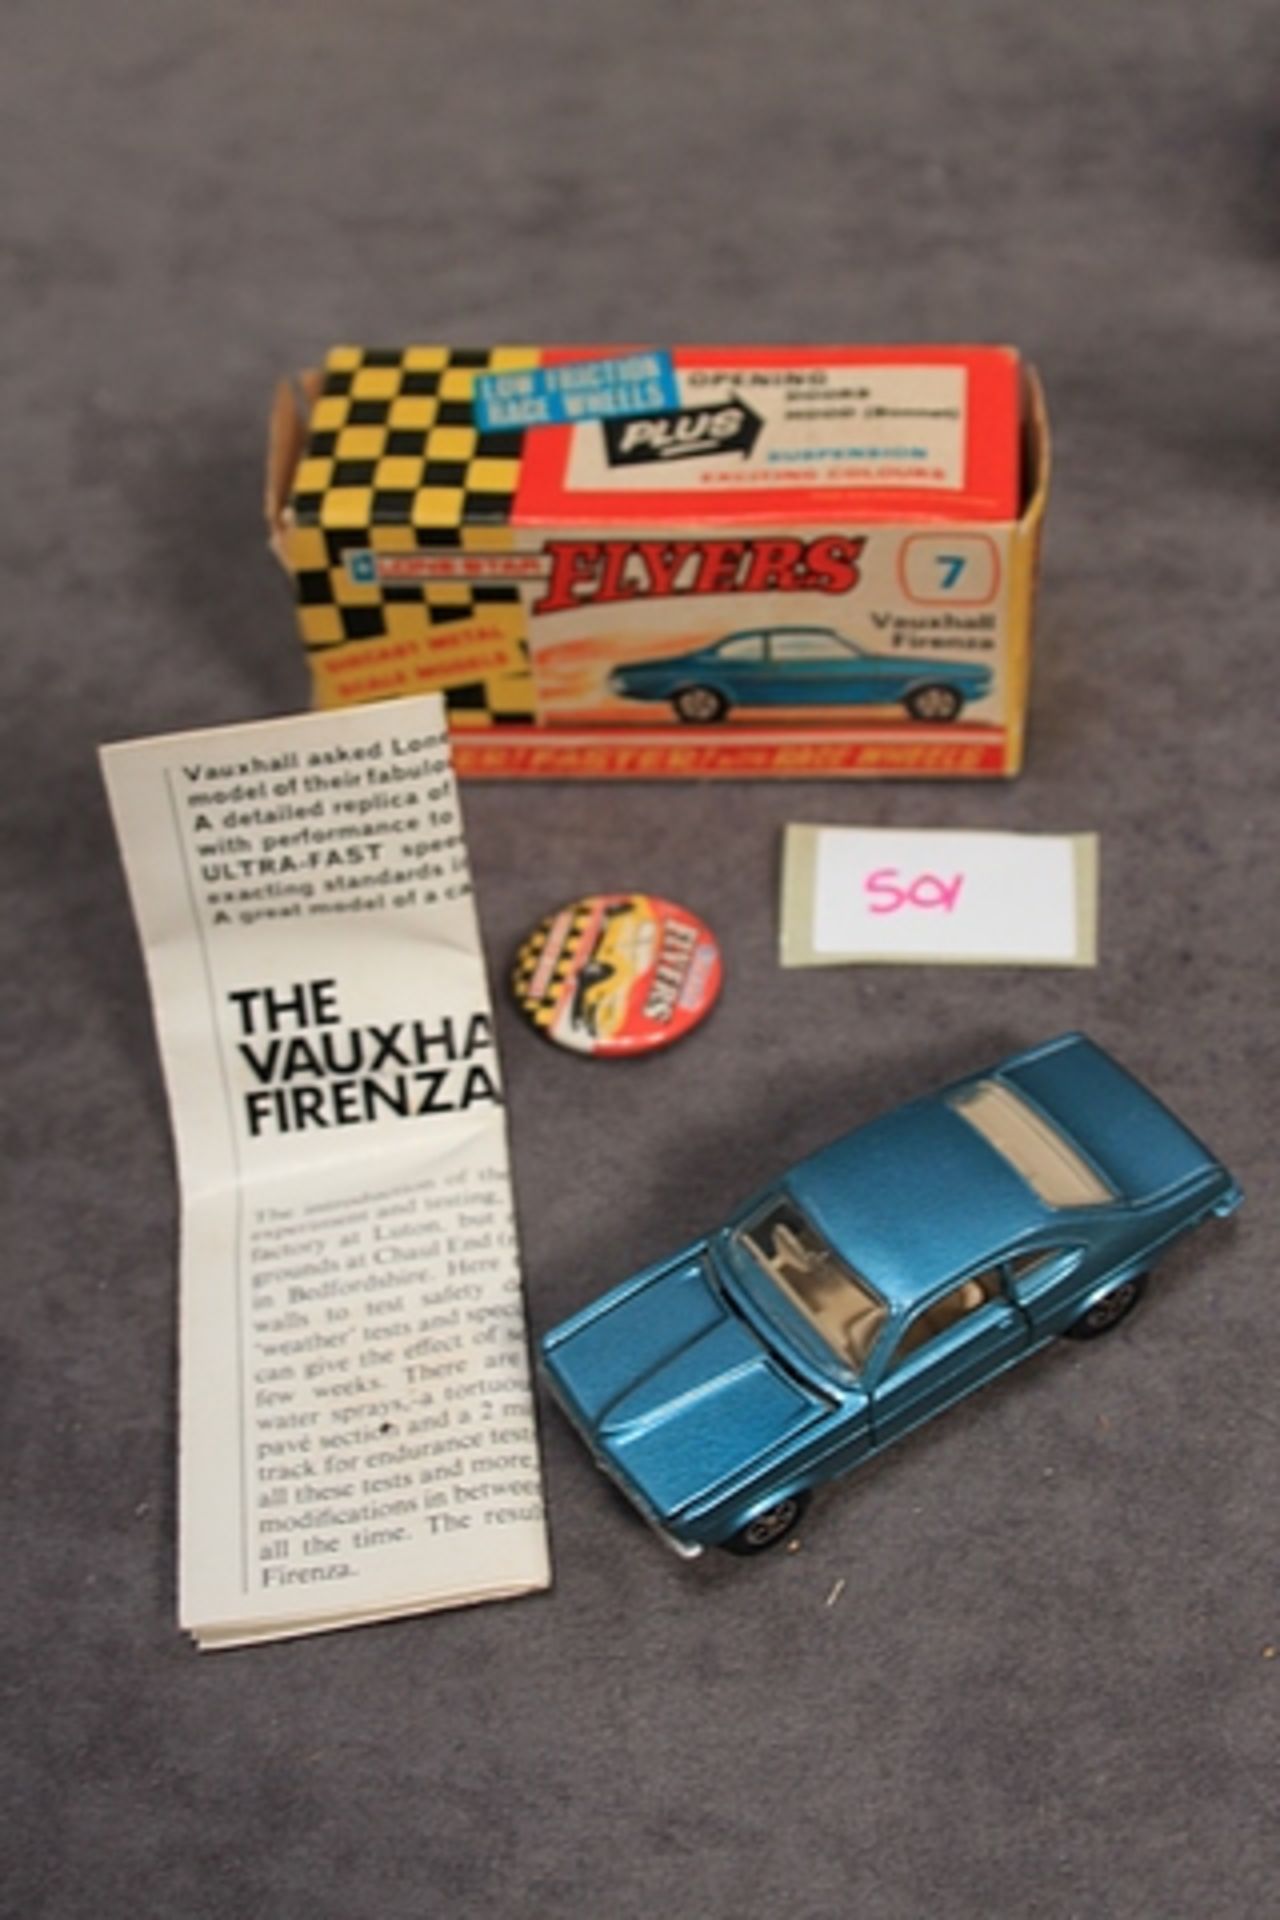 Very Rare mint Lone Star Flyers #7 Vauxhall Firenza in light blue with leaflet and badge in